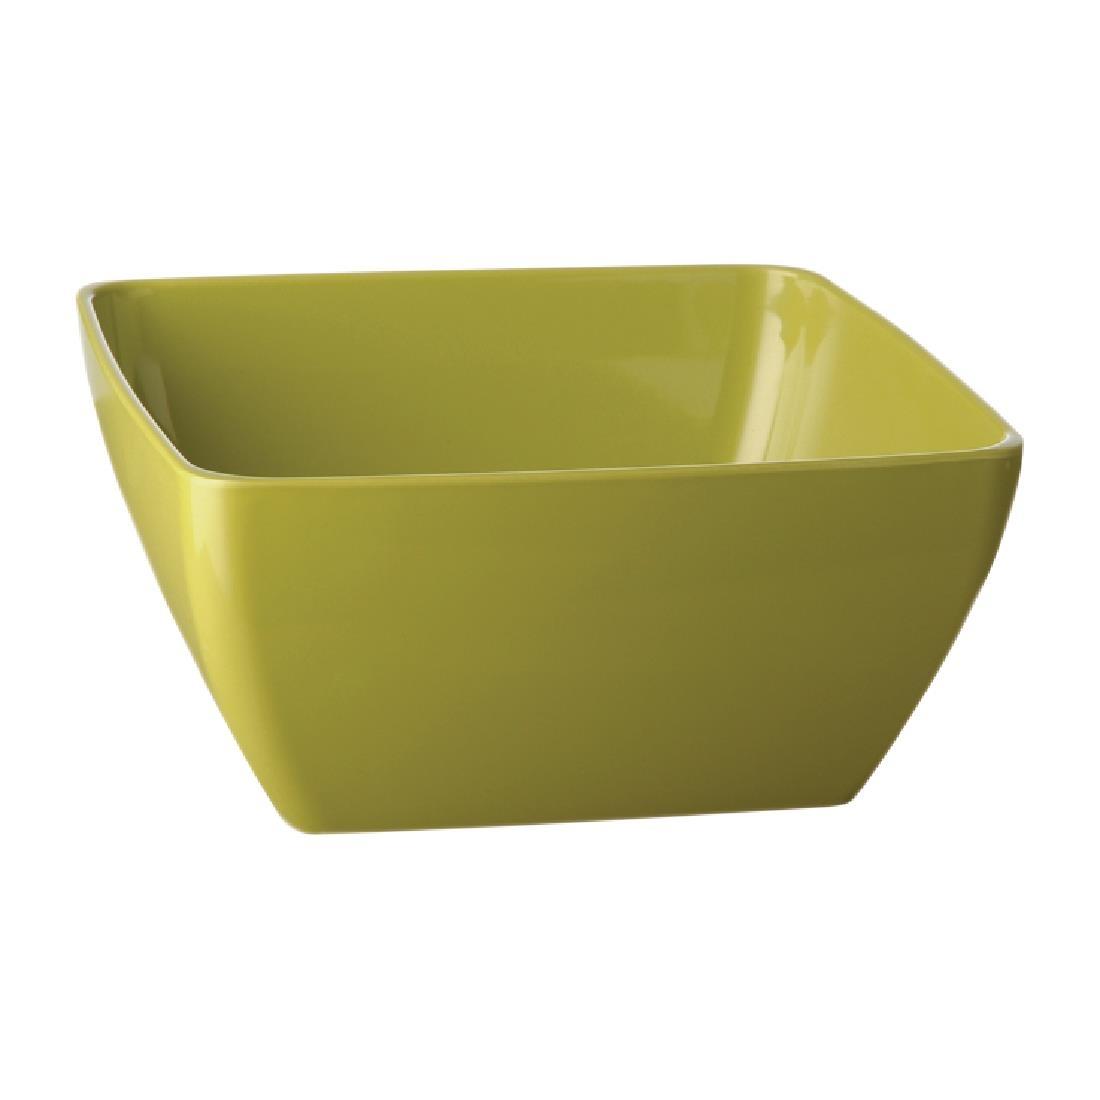 APS Pure Bowl Green 90mm - Each - DS013 - 1